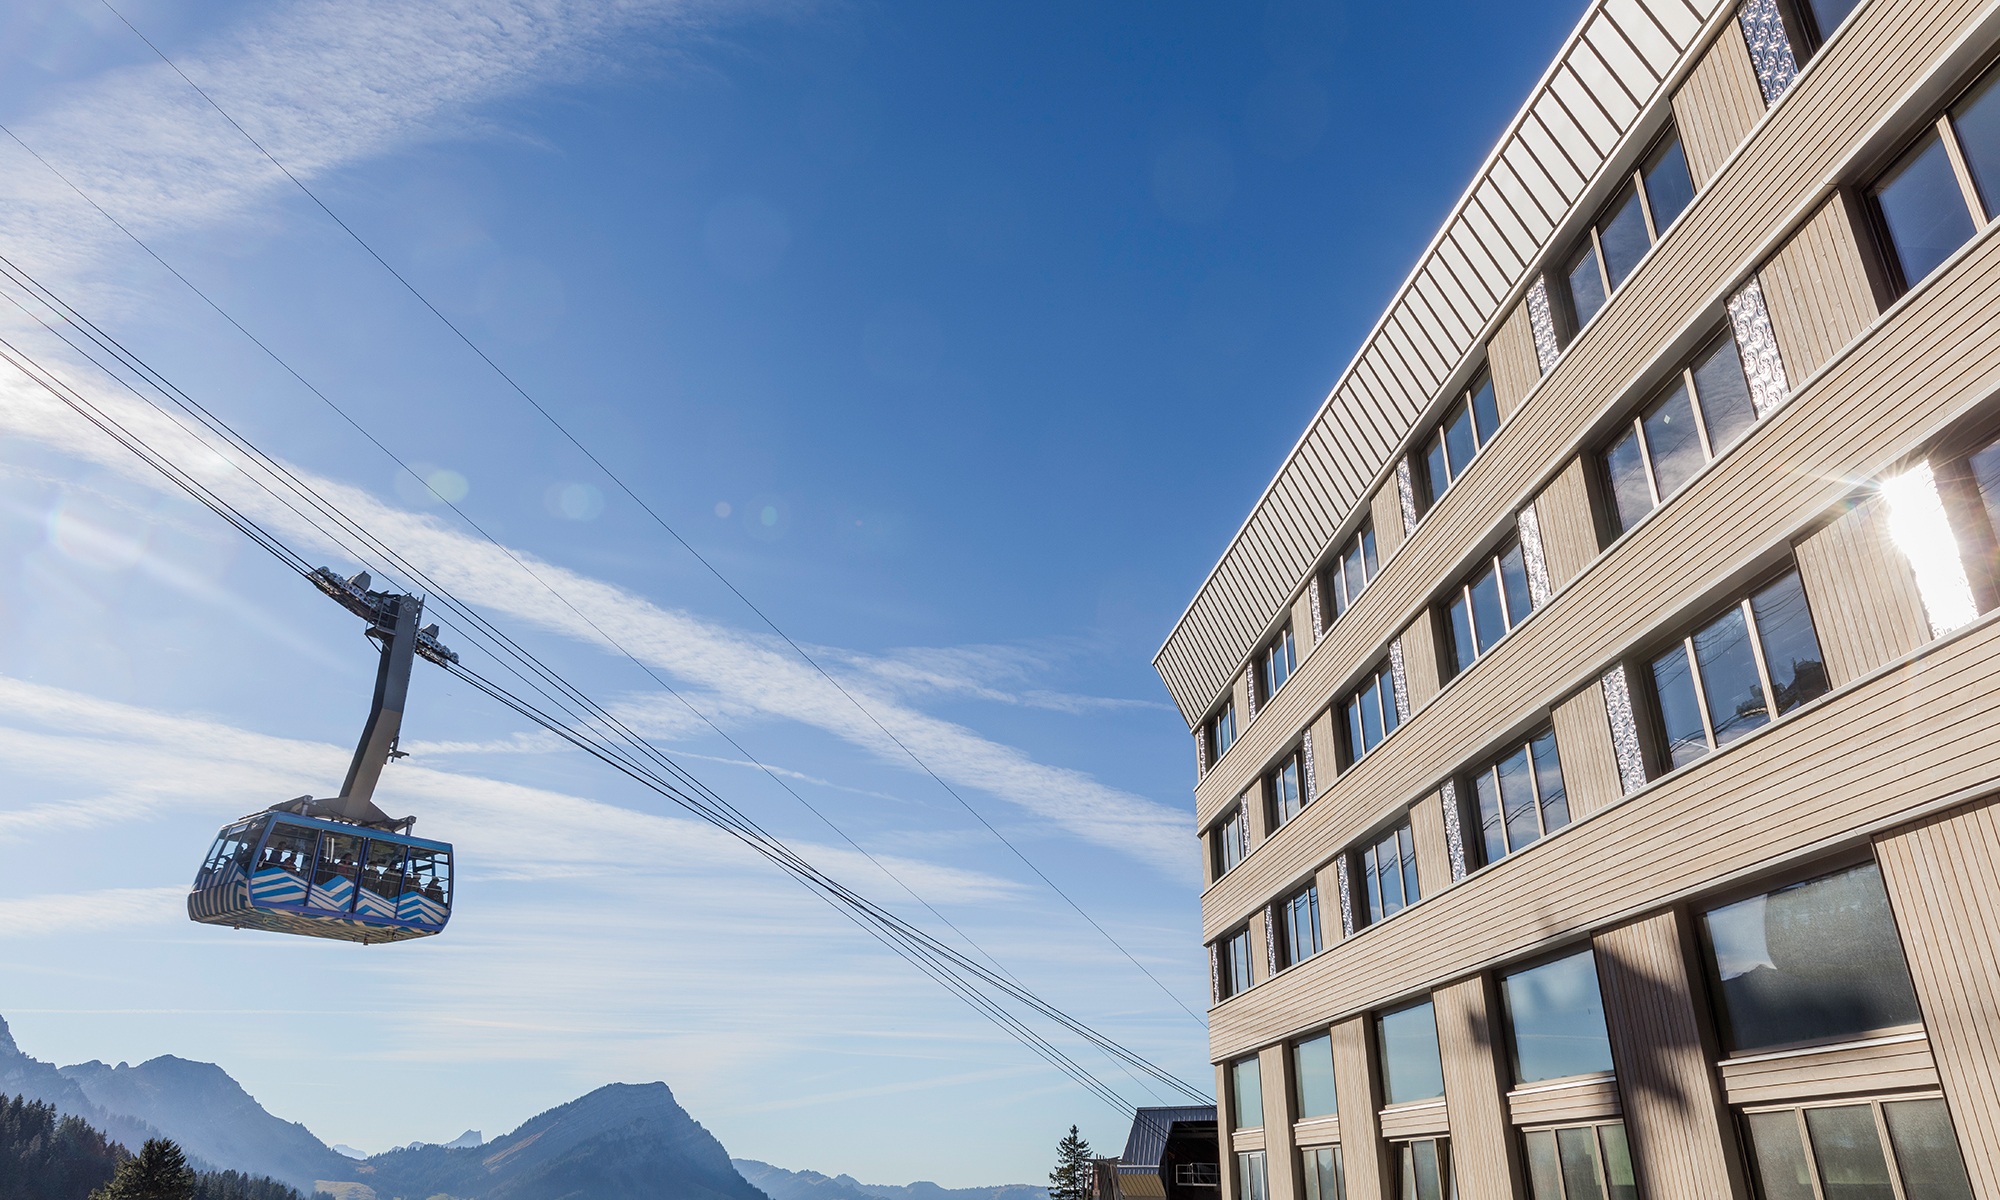 The photograph shows the facade of the Hotel Säntis and the cable car with passengers. In the background are panoramic mountain views with a radiant blue sky.